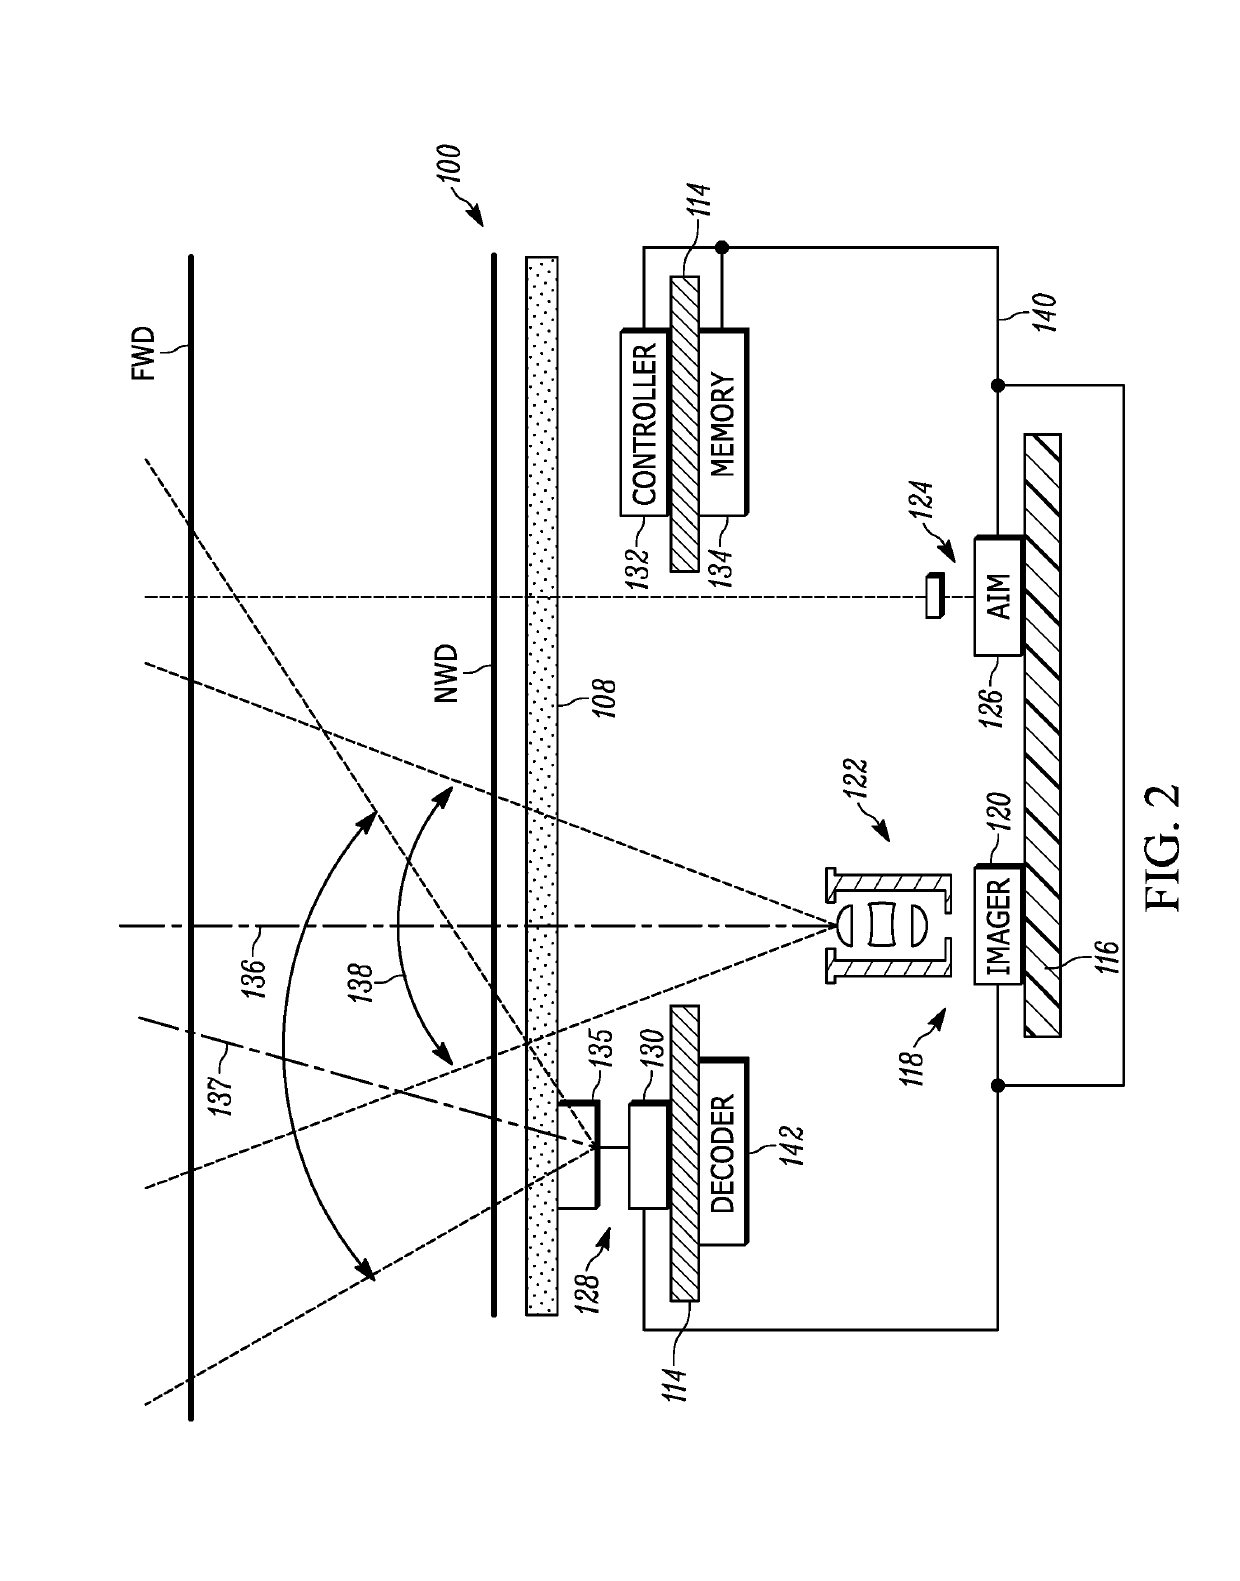 Handheld symbol reader with optical element to redirect central illumination axis